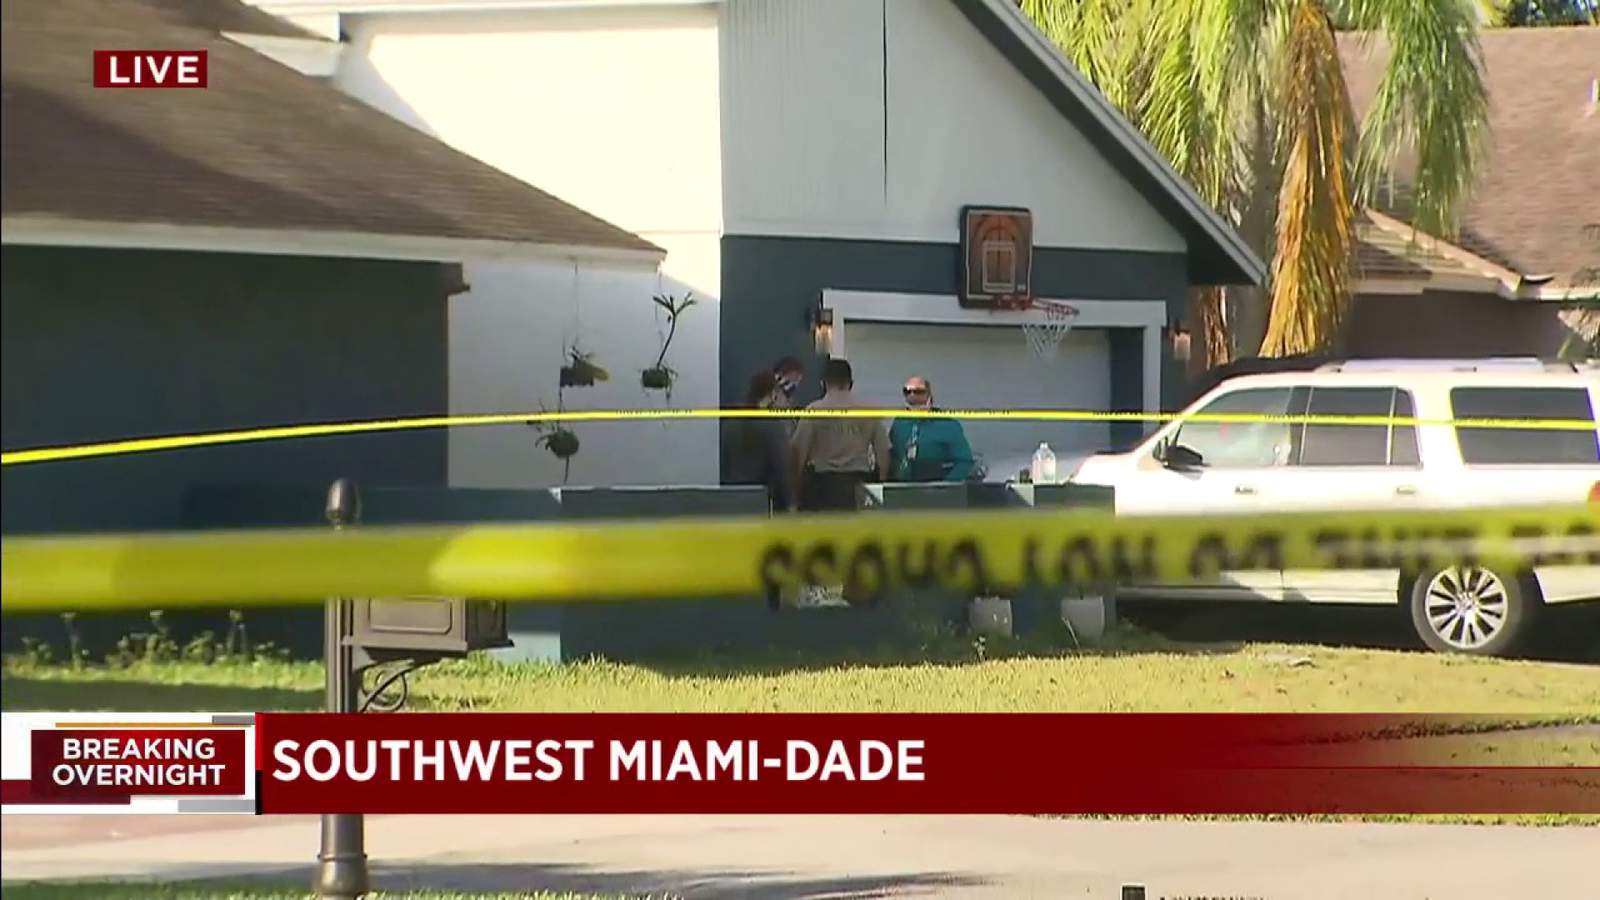 Police are searching for a gunman after the man fired at his Miami-Dade home